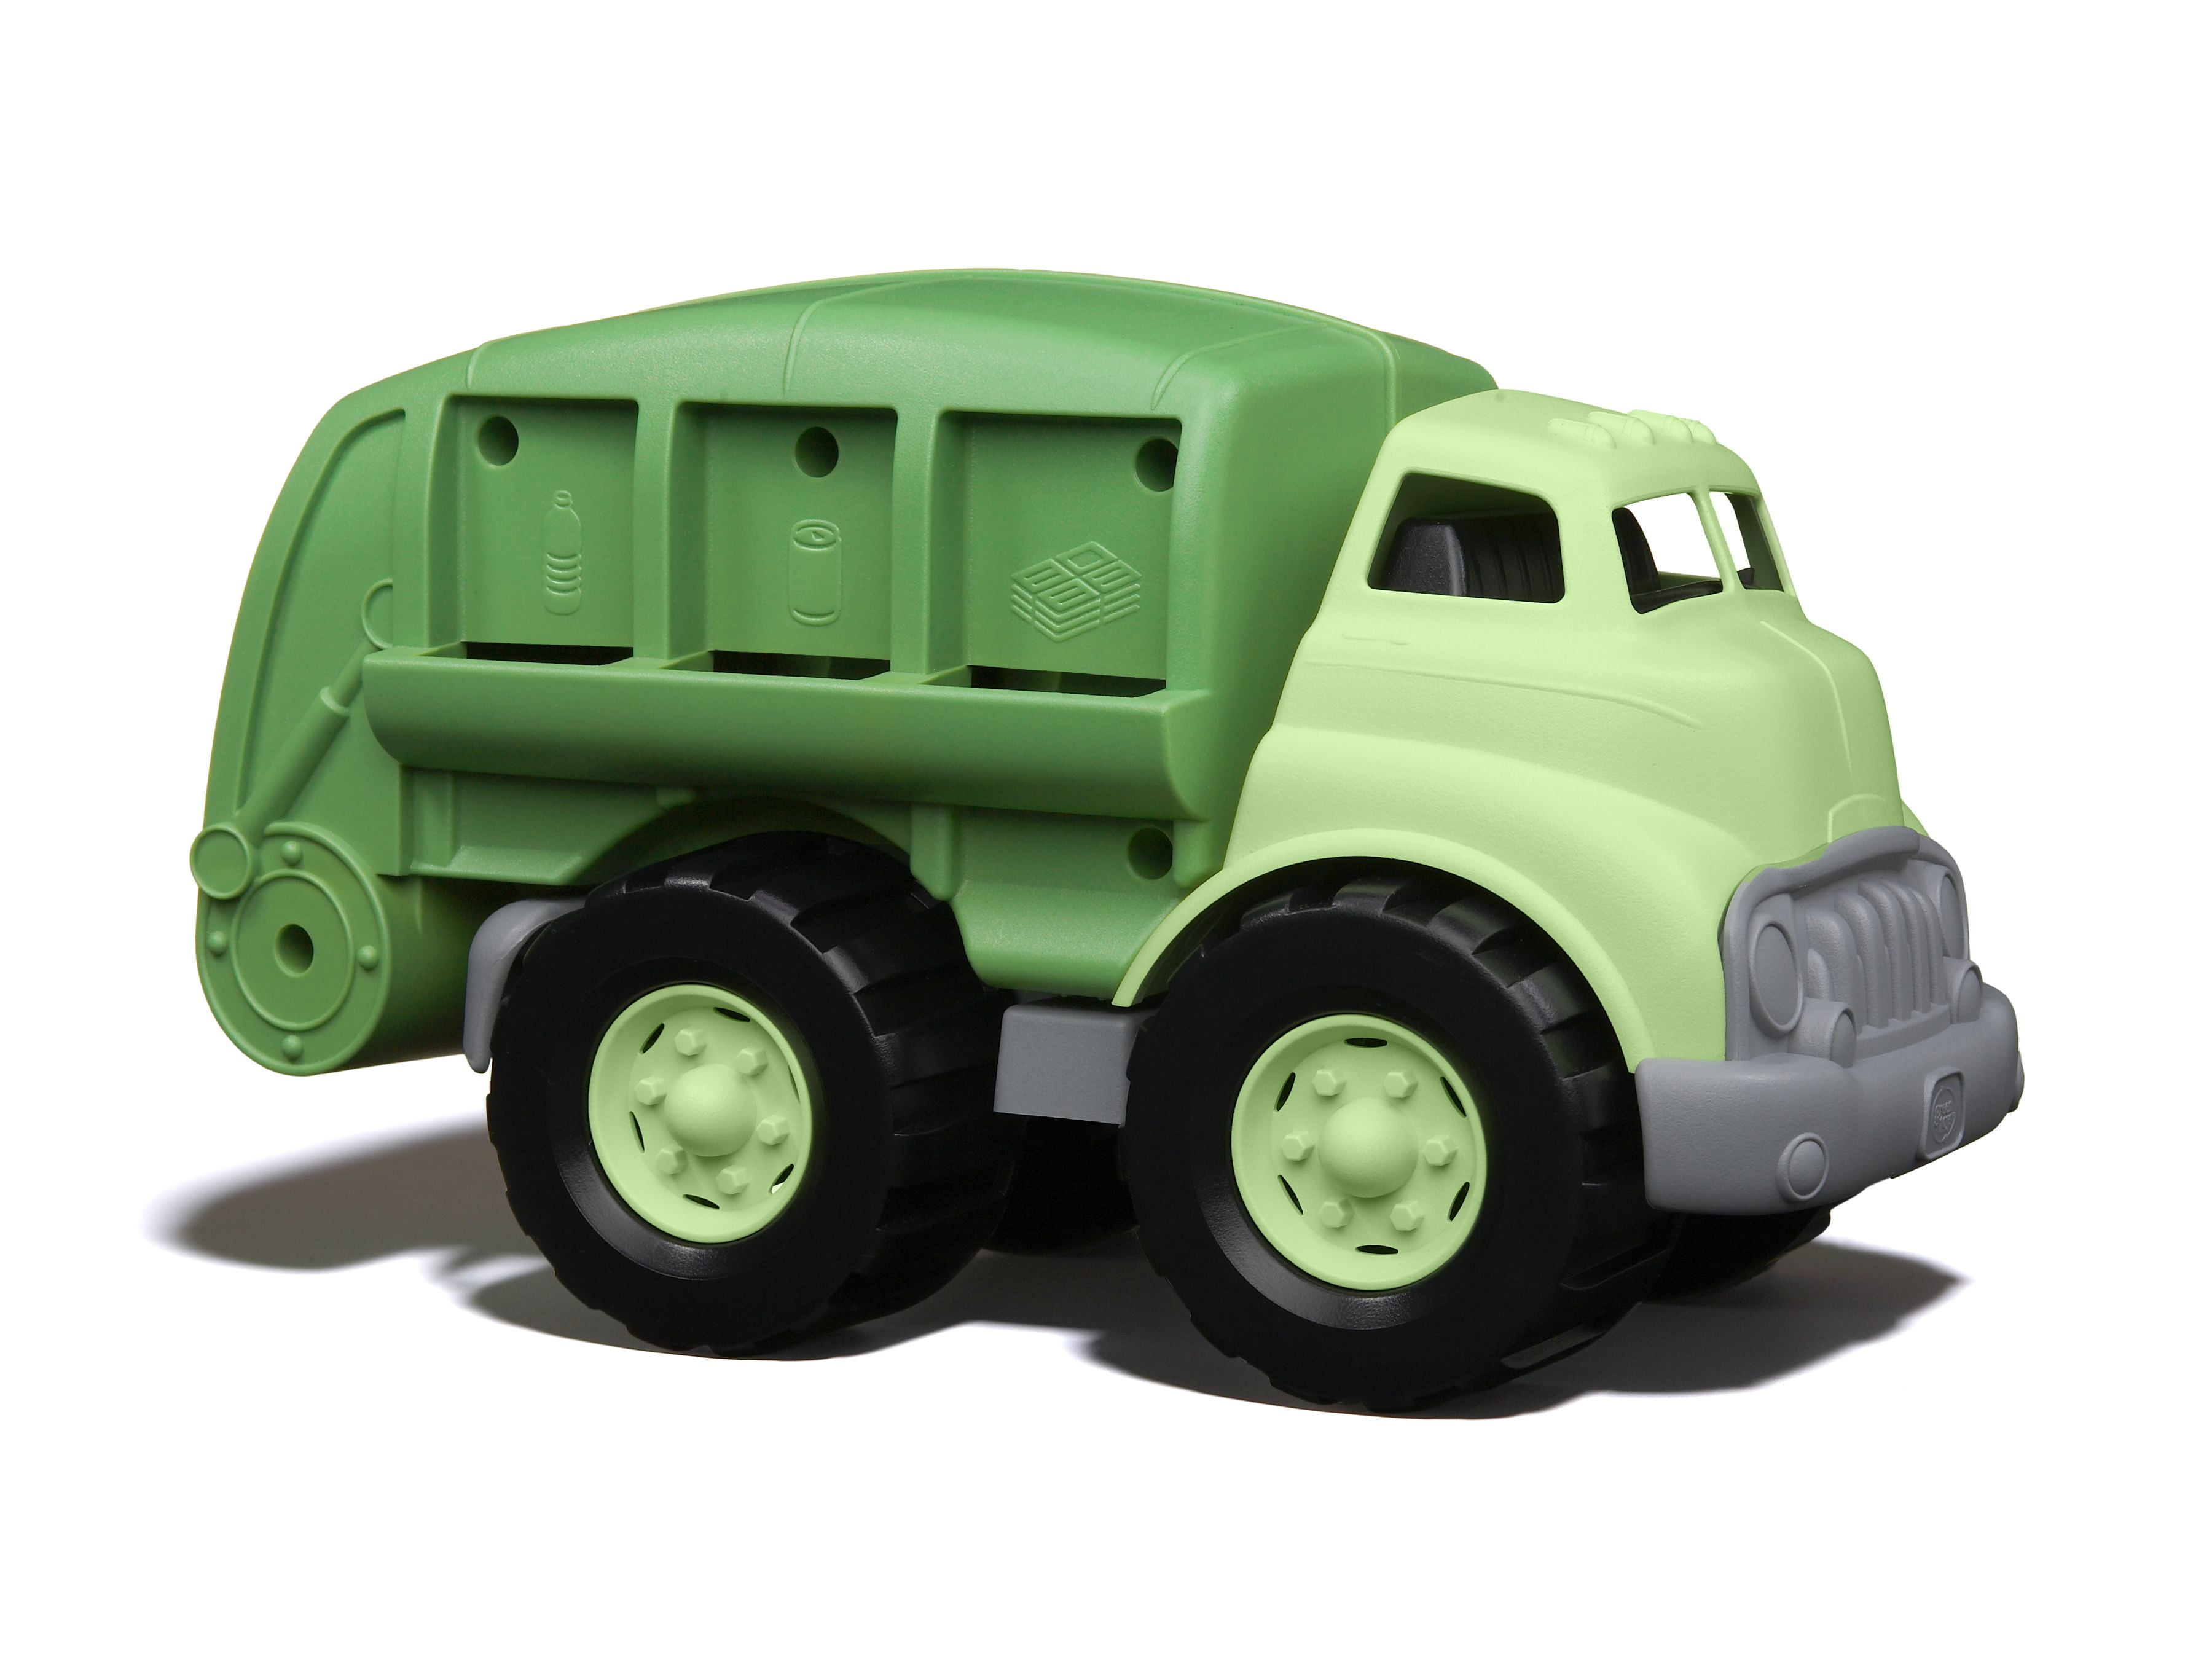 Green Toys Dump Truck Gy005 for sale online 